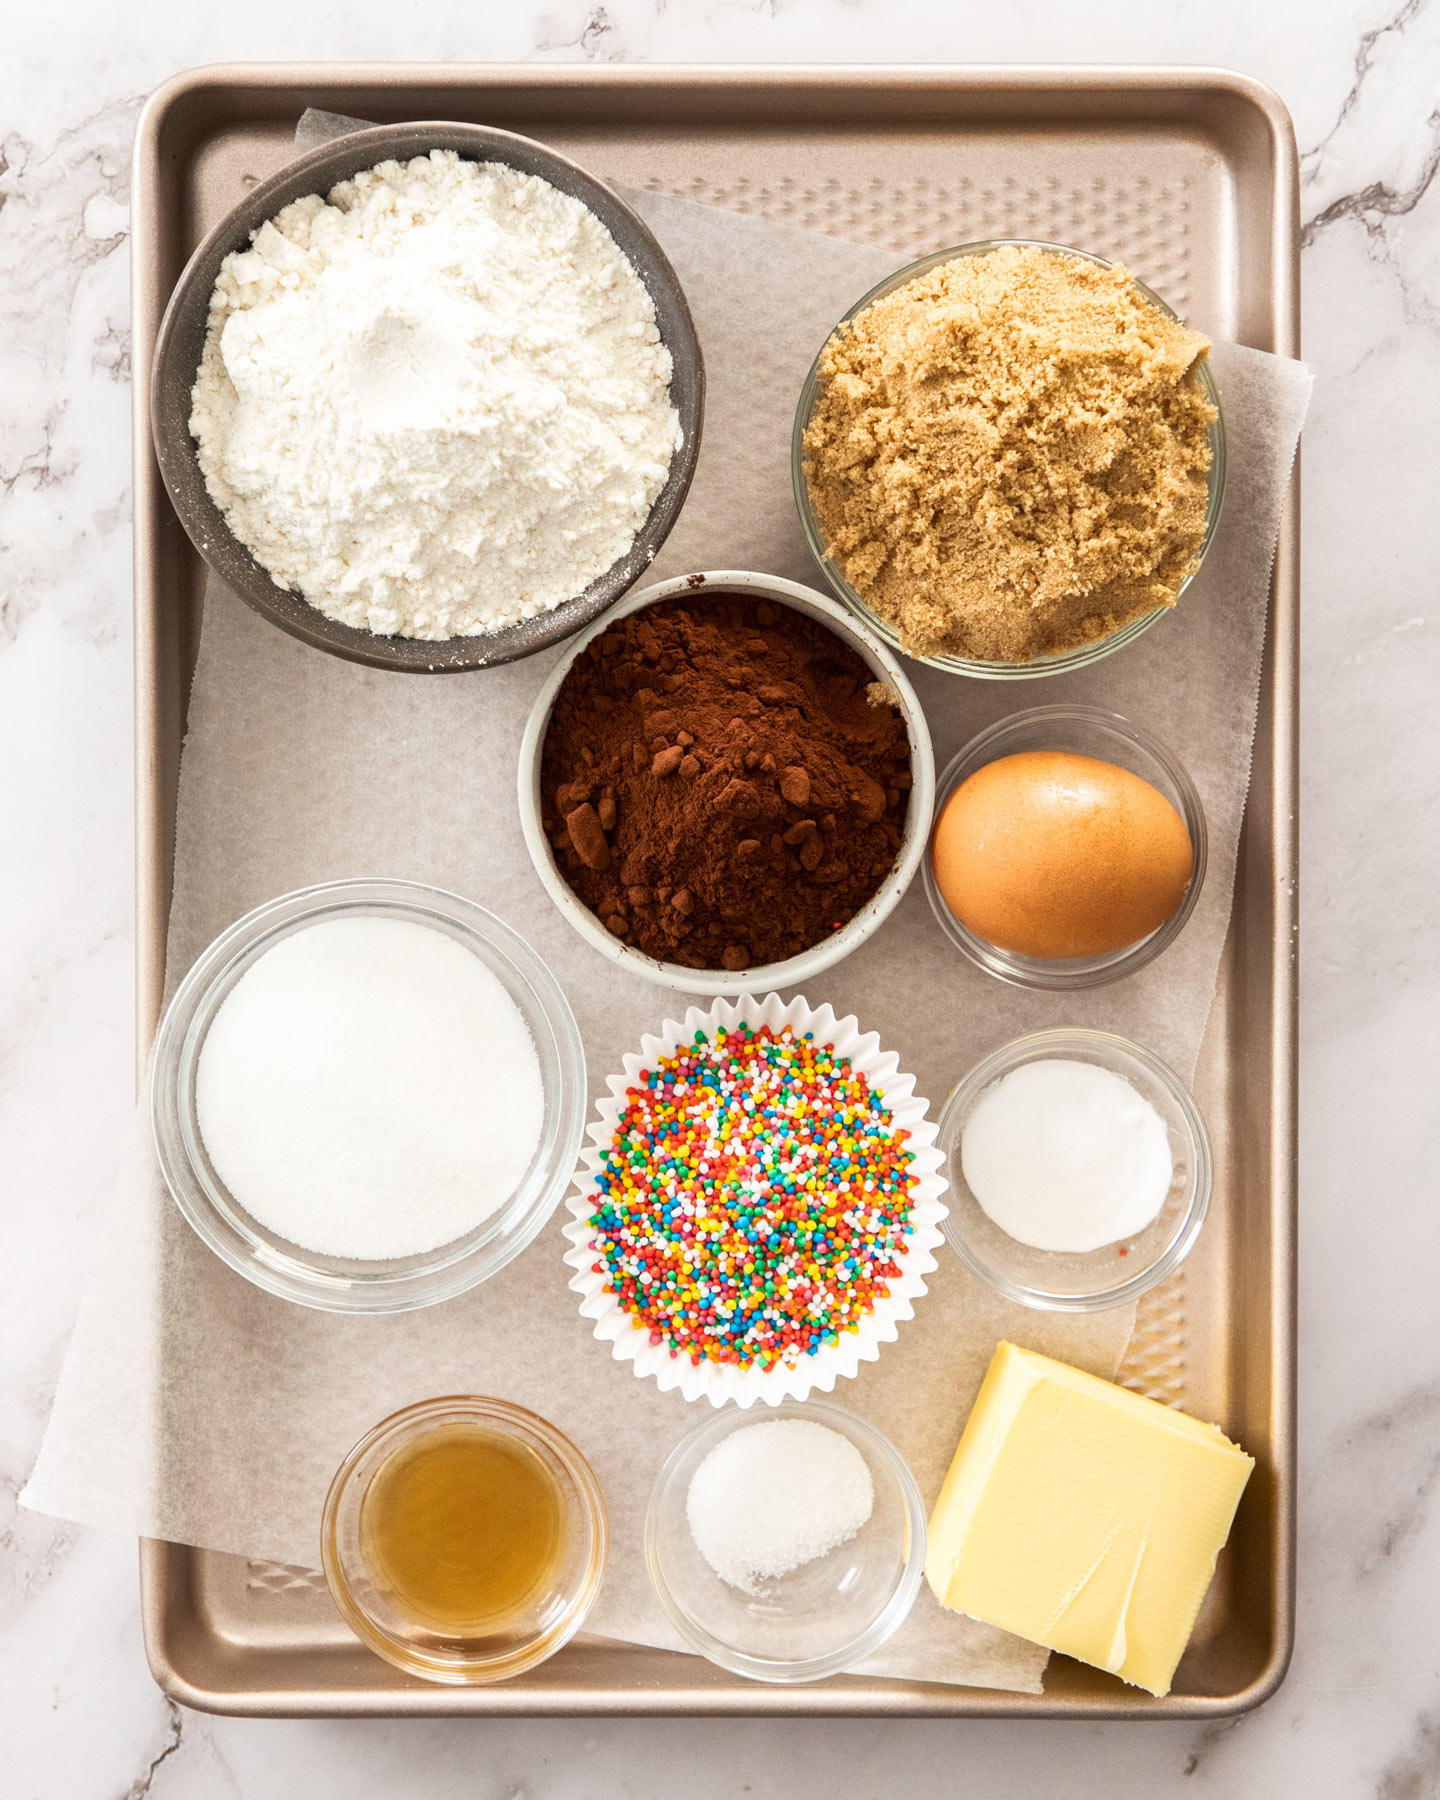 Ingredients for chocolate sprinkle cookies on a baking tray.